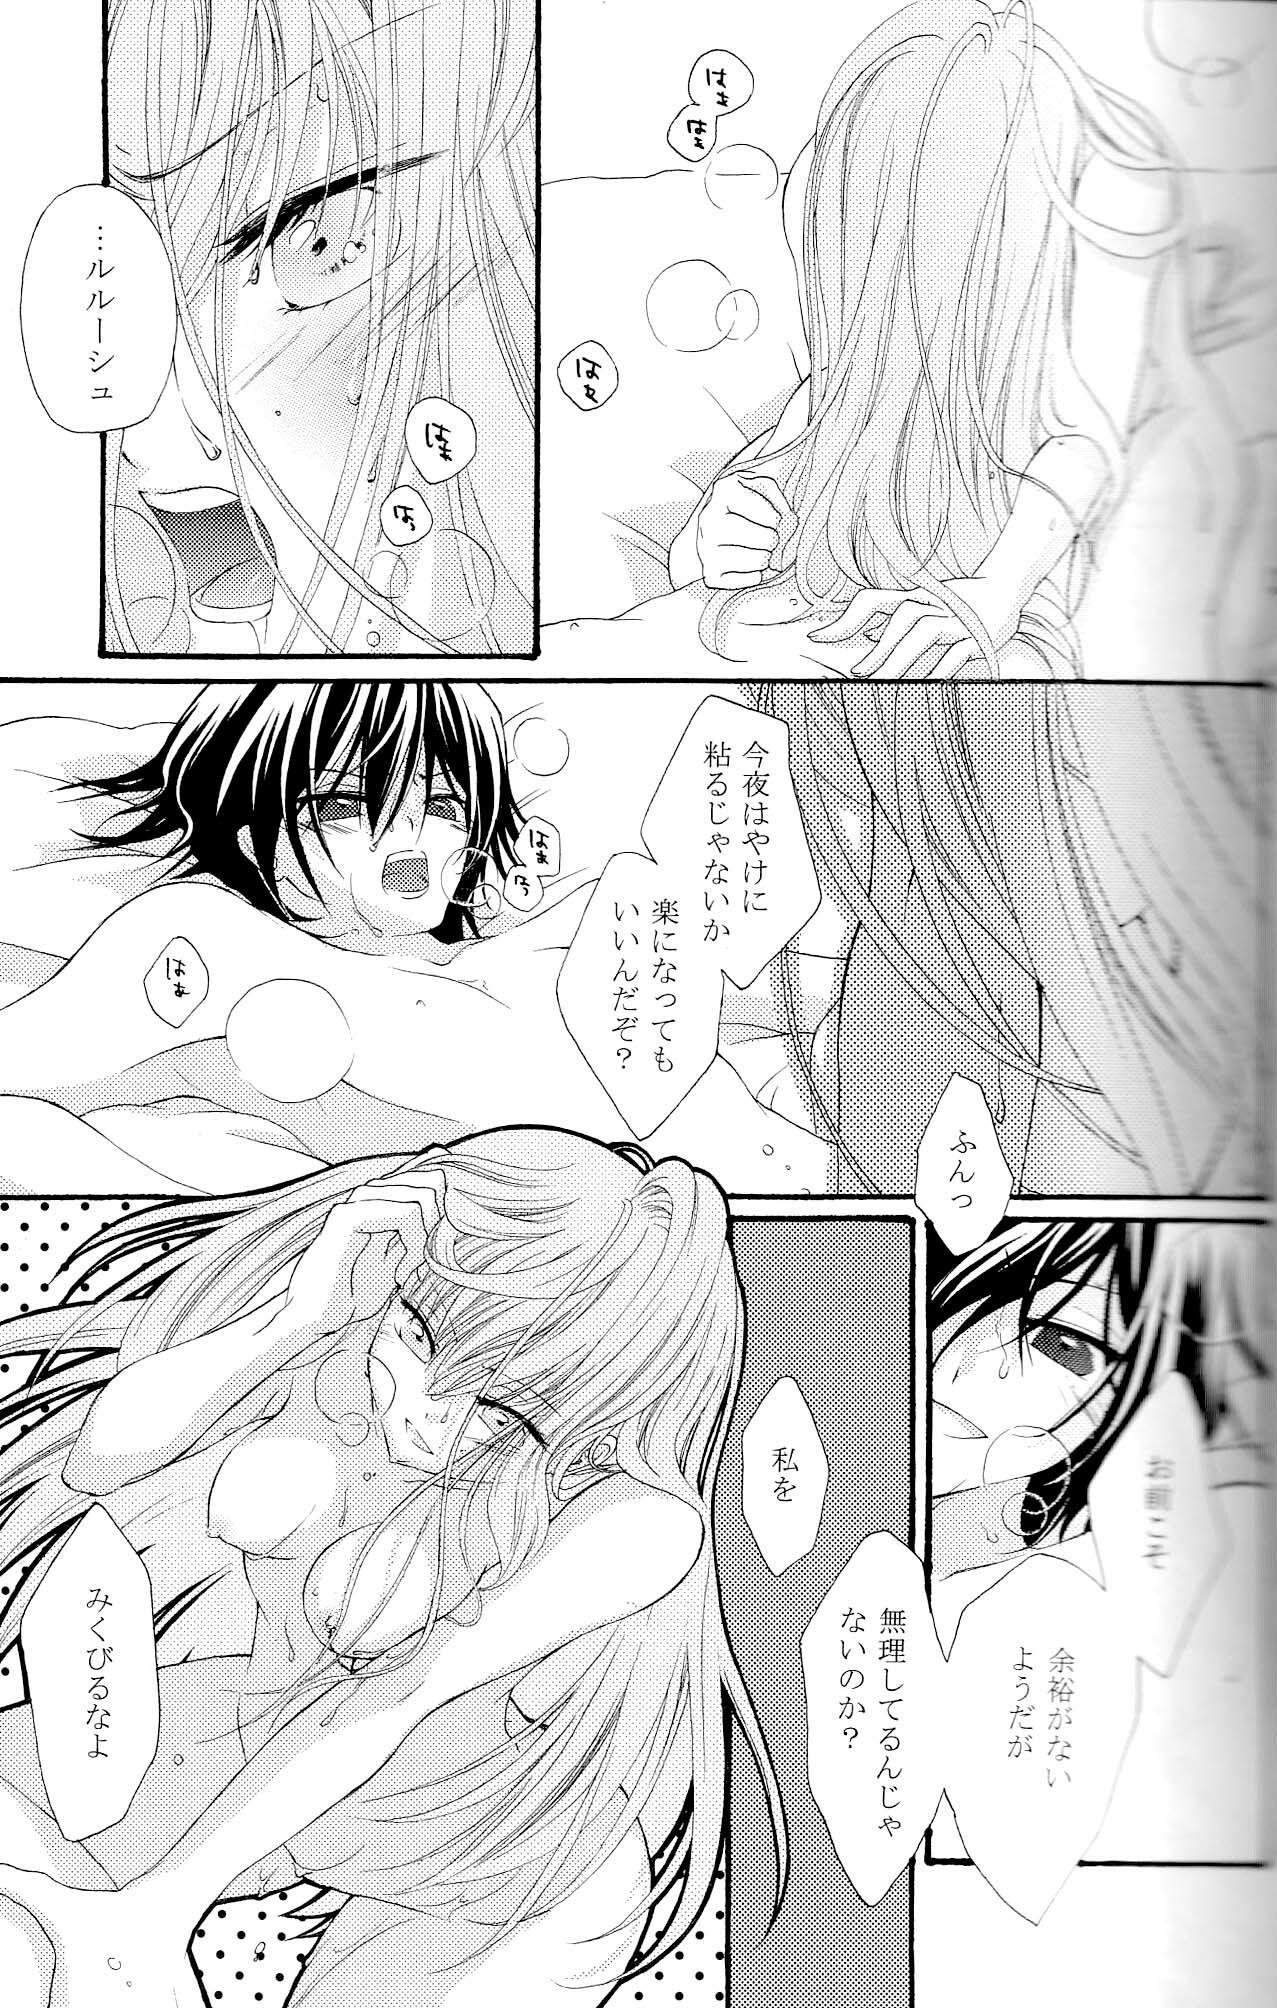 [APRICOT TEA] The last love letter presented to my dear only partner. (Code Geass) page 10 full